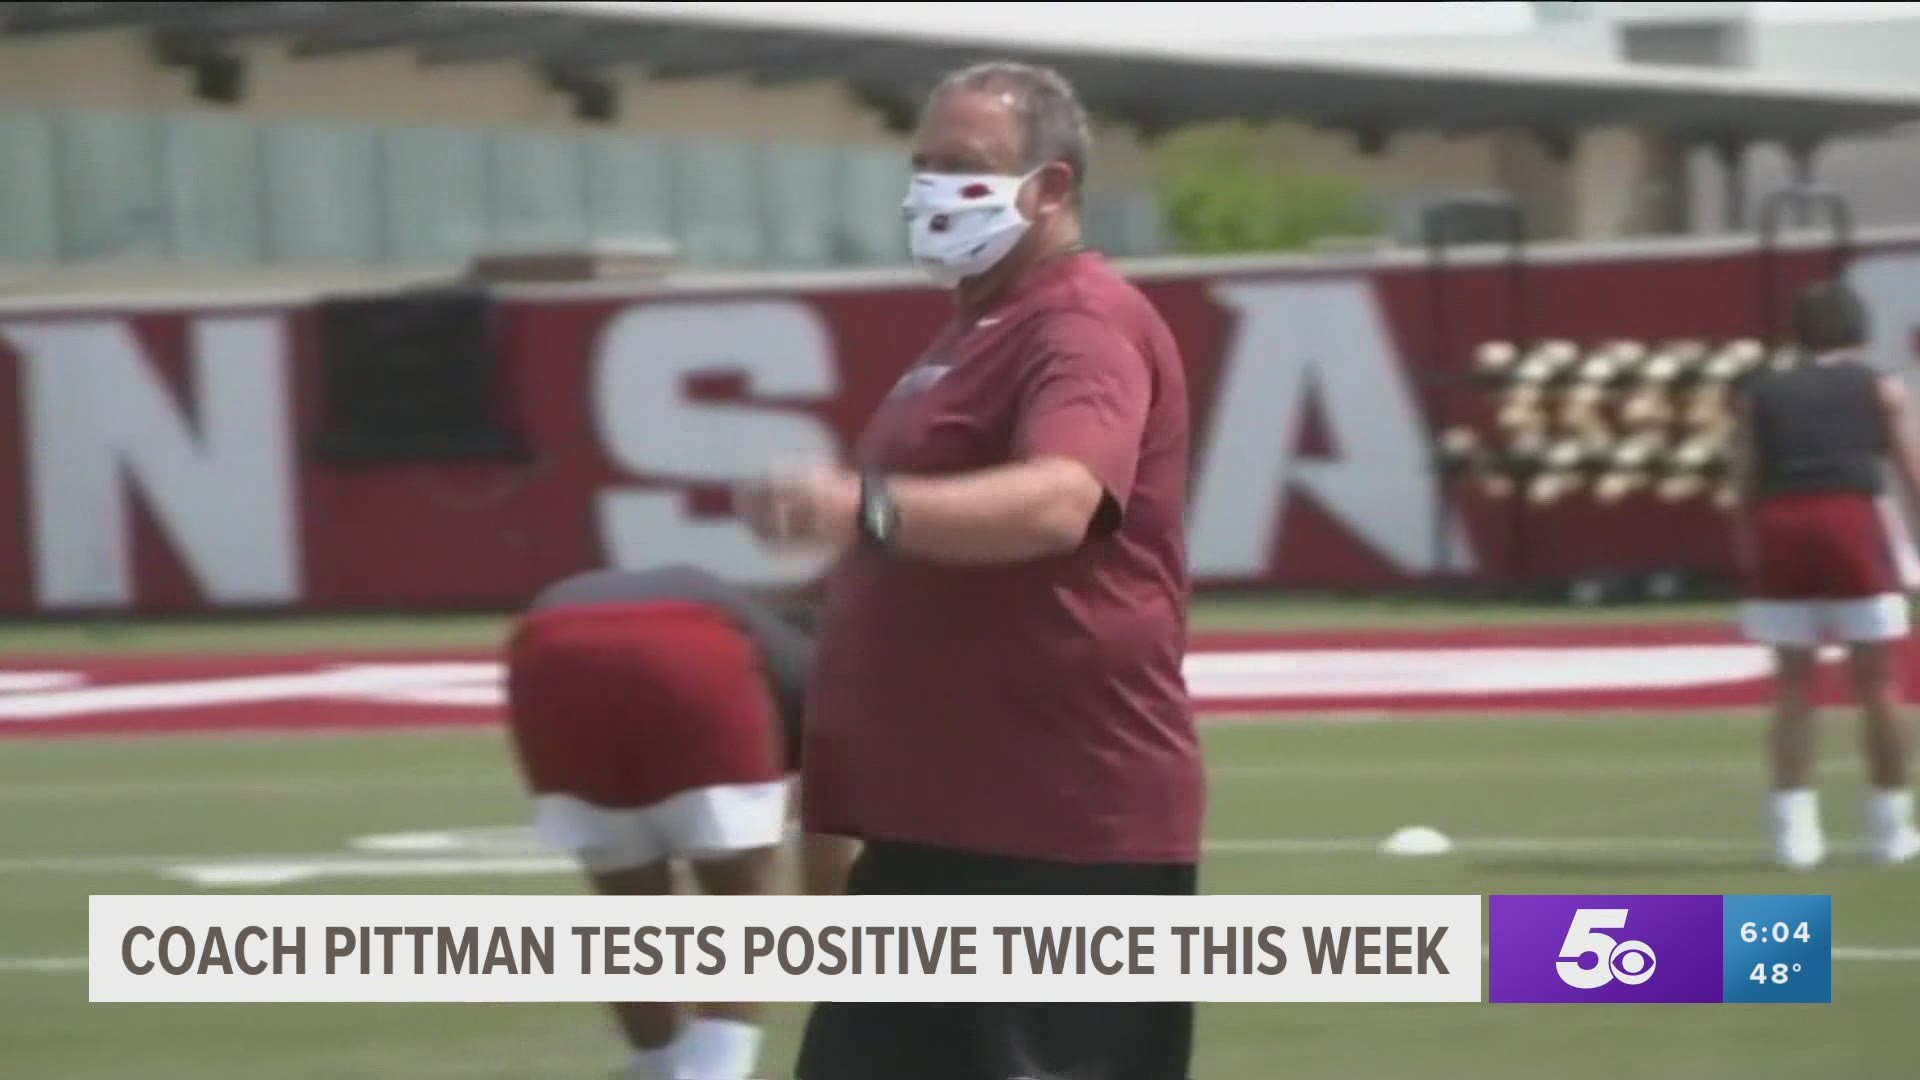 Razorback head coach Sam Pittman has tested positive for COVID-19 twice this week. He will not coach Saturday's game against Florida. https://bit.ly/32sXBFd